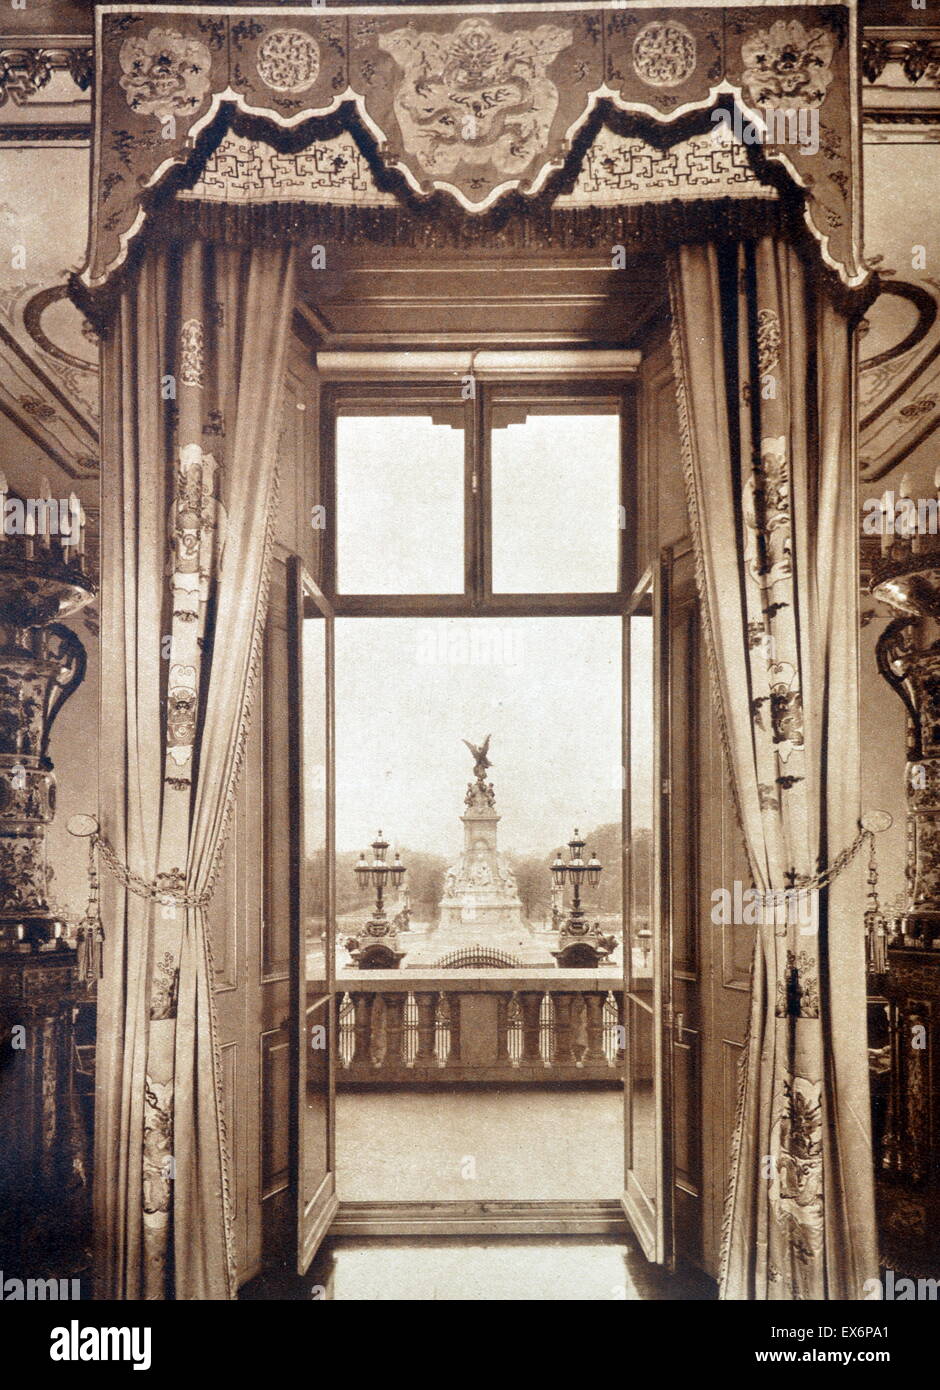 Doors leading out to the royal balcony at Buckingham palace in London 1936 Stock Photo